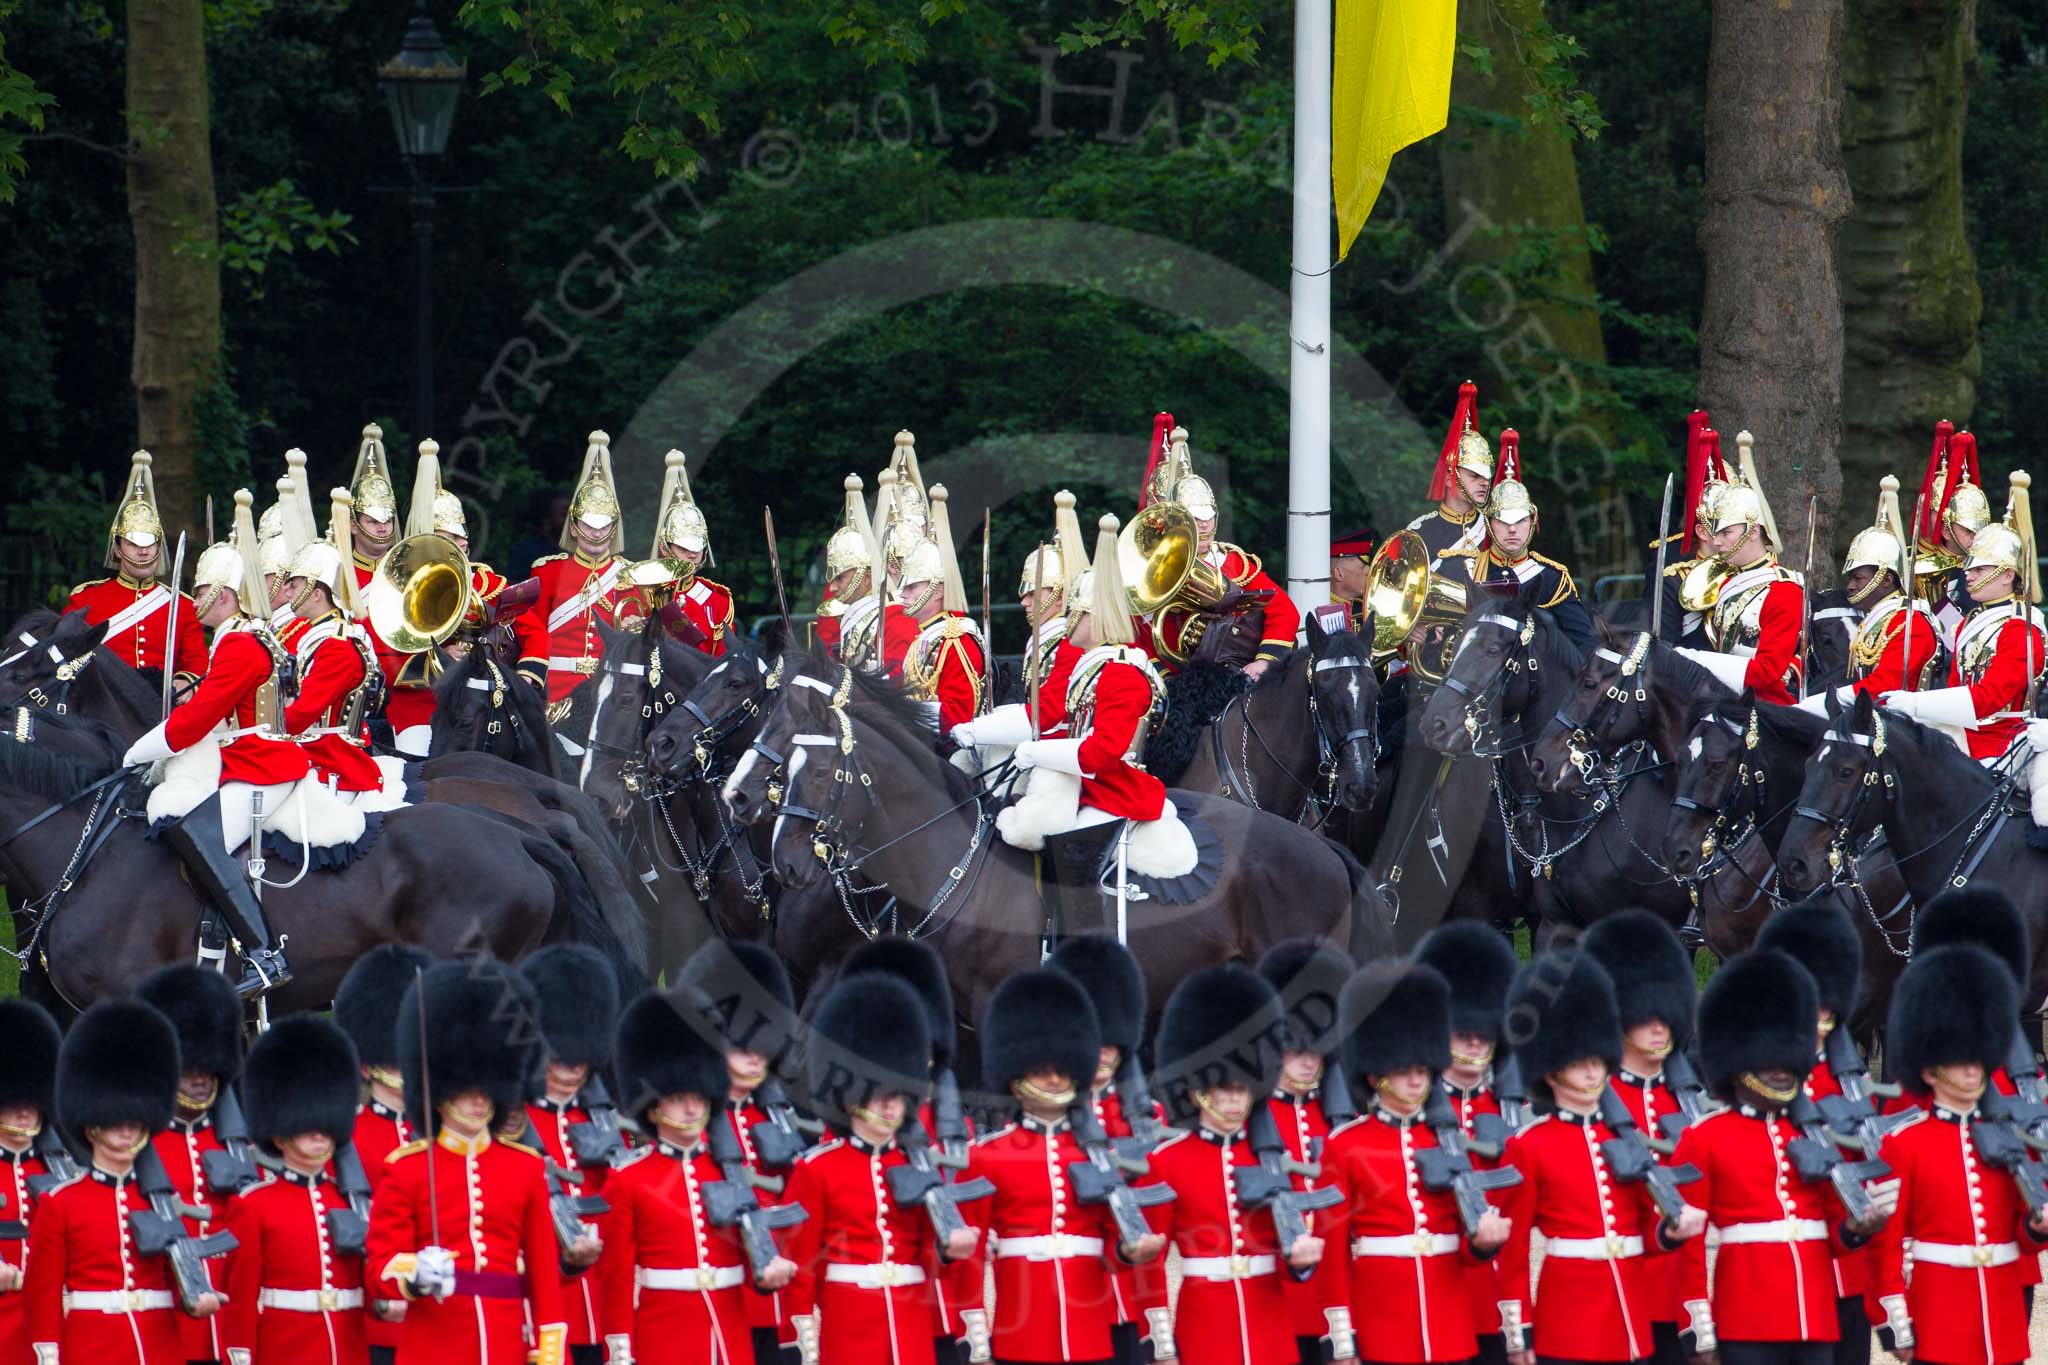 Major General's Review 2013: Next in the Royal Procession are the First and Second Division of the Sovereign's Escort, The Life Guards, here riding down Horse Guards Road passing The Mounted Bands of the Household Cavalry..
Horse Guards Parade, Westminster,
London SW1,

United Kingdom,
on 01 June 2013 at 10:58, image #236